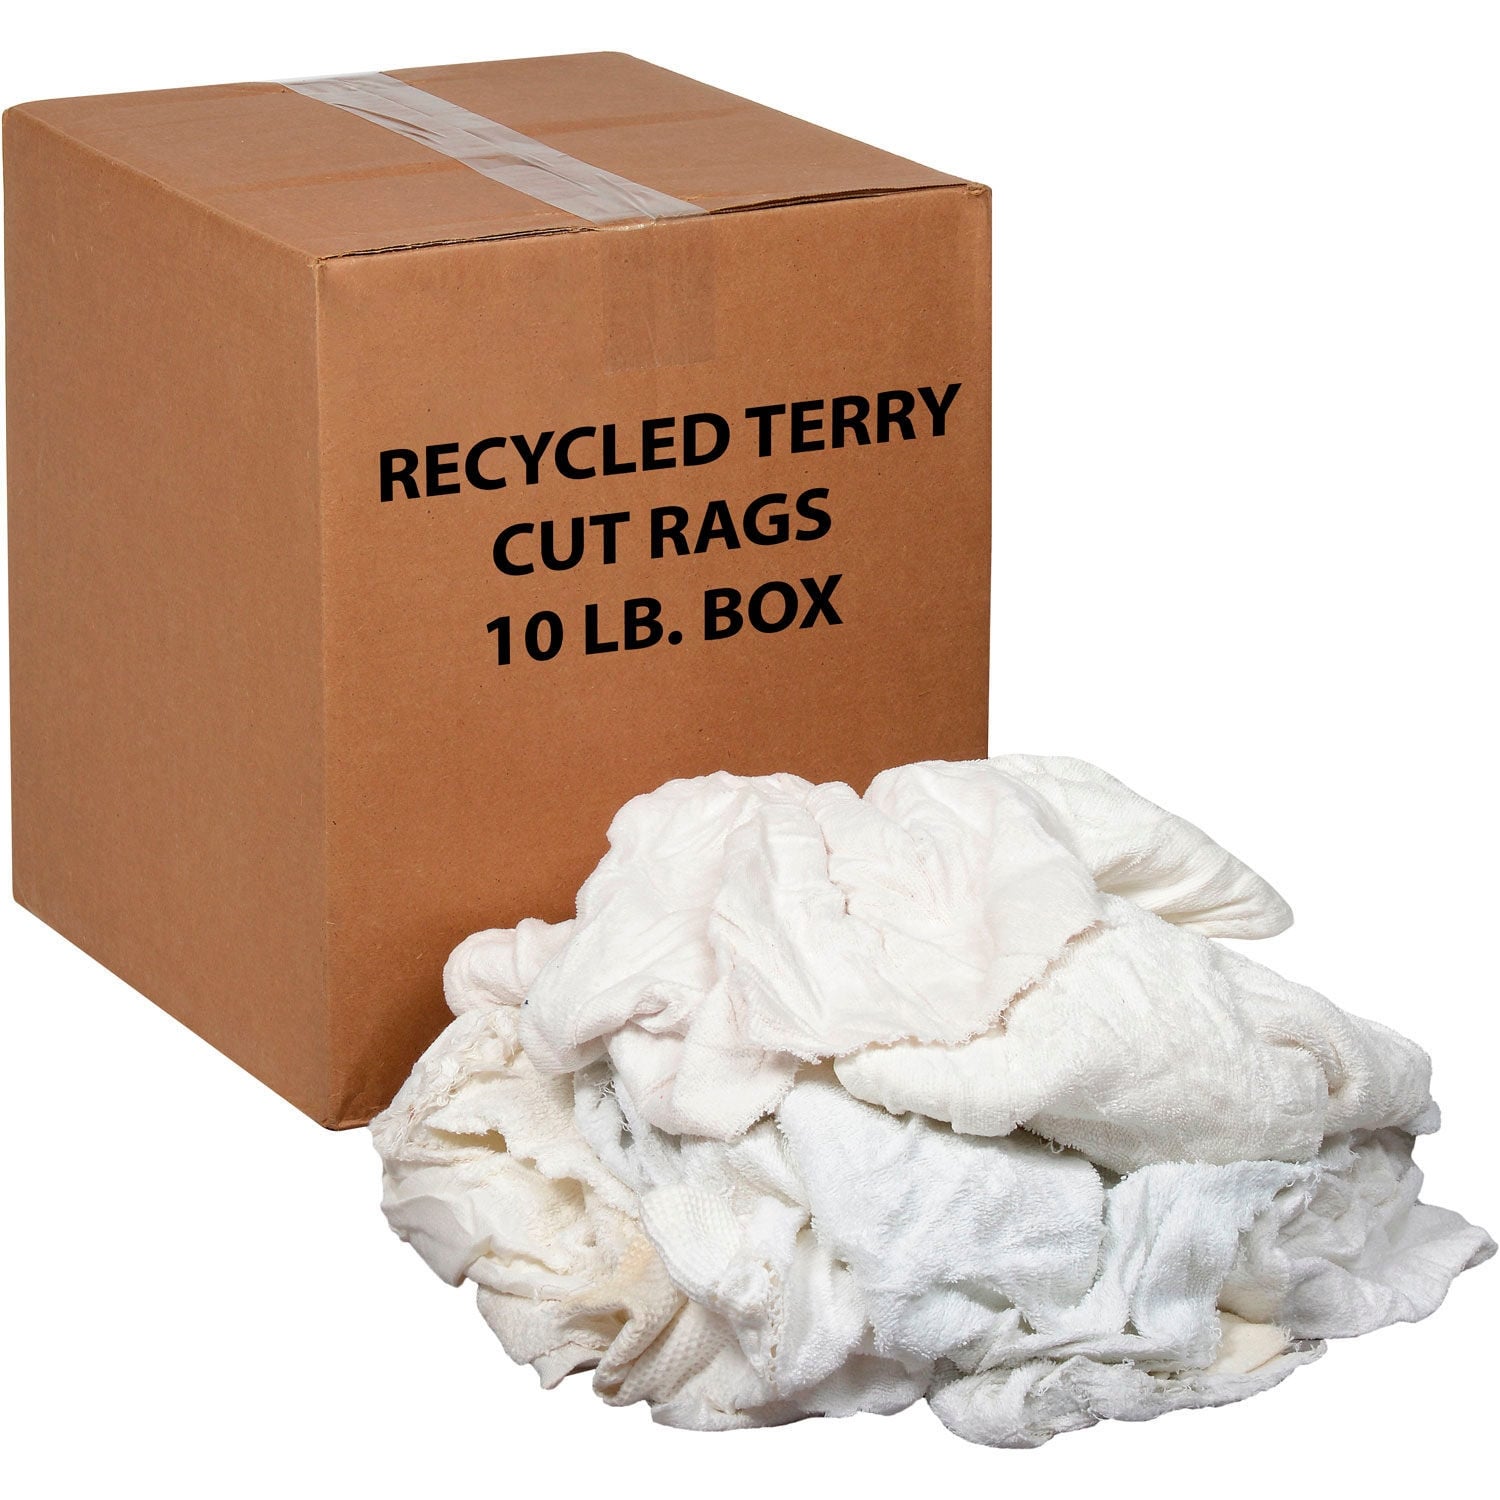 10 Lb. Box Premium Recycled Cotton Terry Cut Rags, White - Assorted